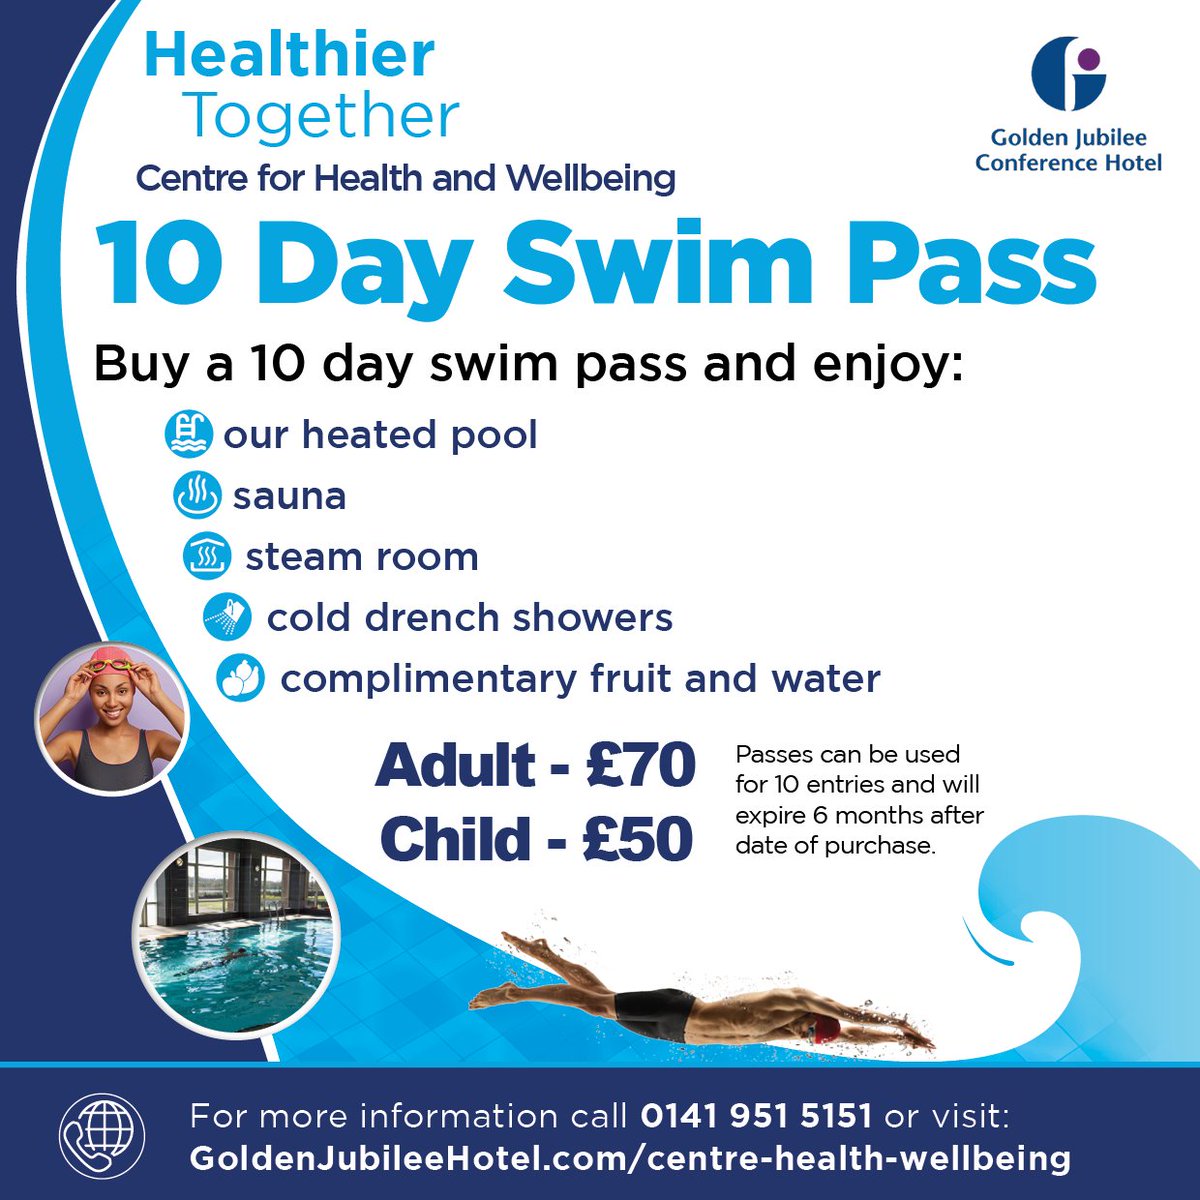 Enjoy swimming this summer!🏊‍♀️ Our heated indoor pool is available to all members and those who purchase a 10 day pass! 🗓️Pass allows 10 Entries in a 6 month period from date of purchase ☎️For further details contact us on 0141 951 5151 #healthandwellness #swimming